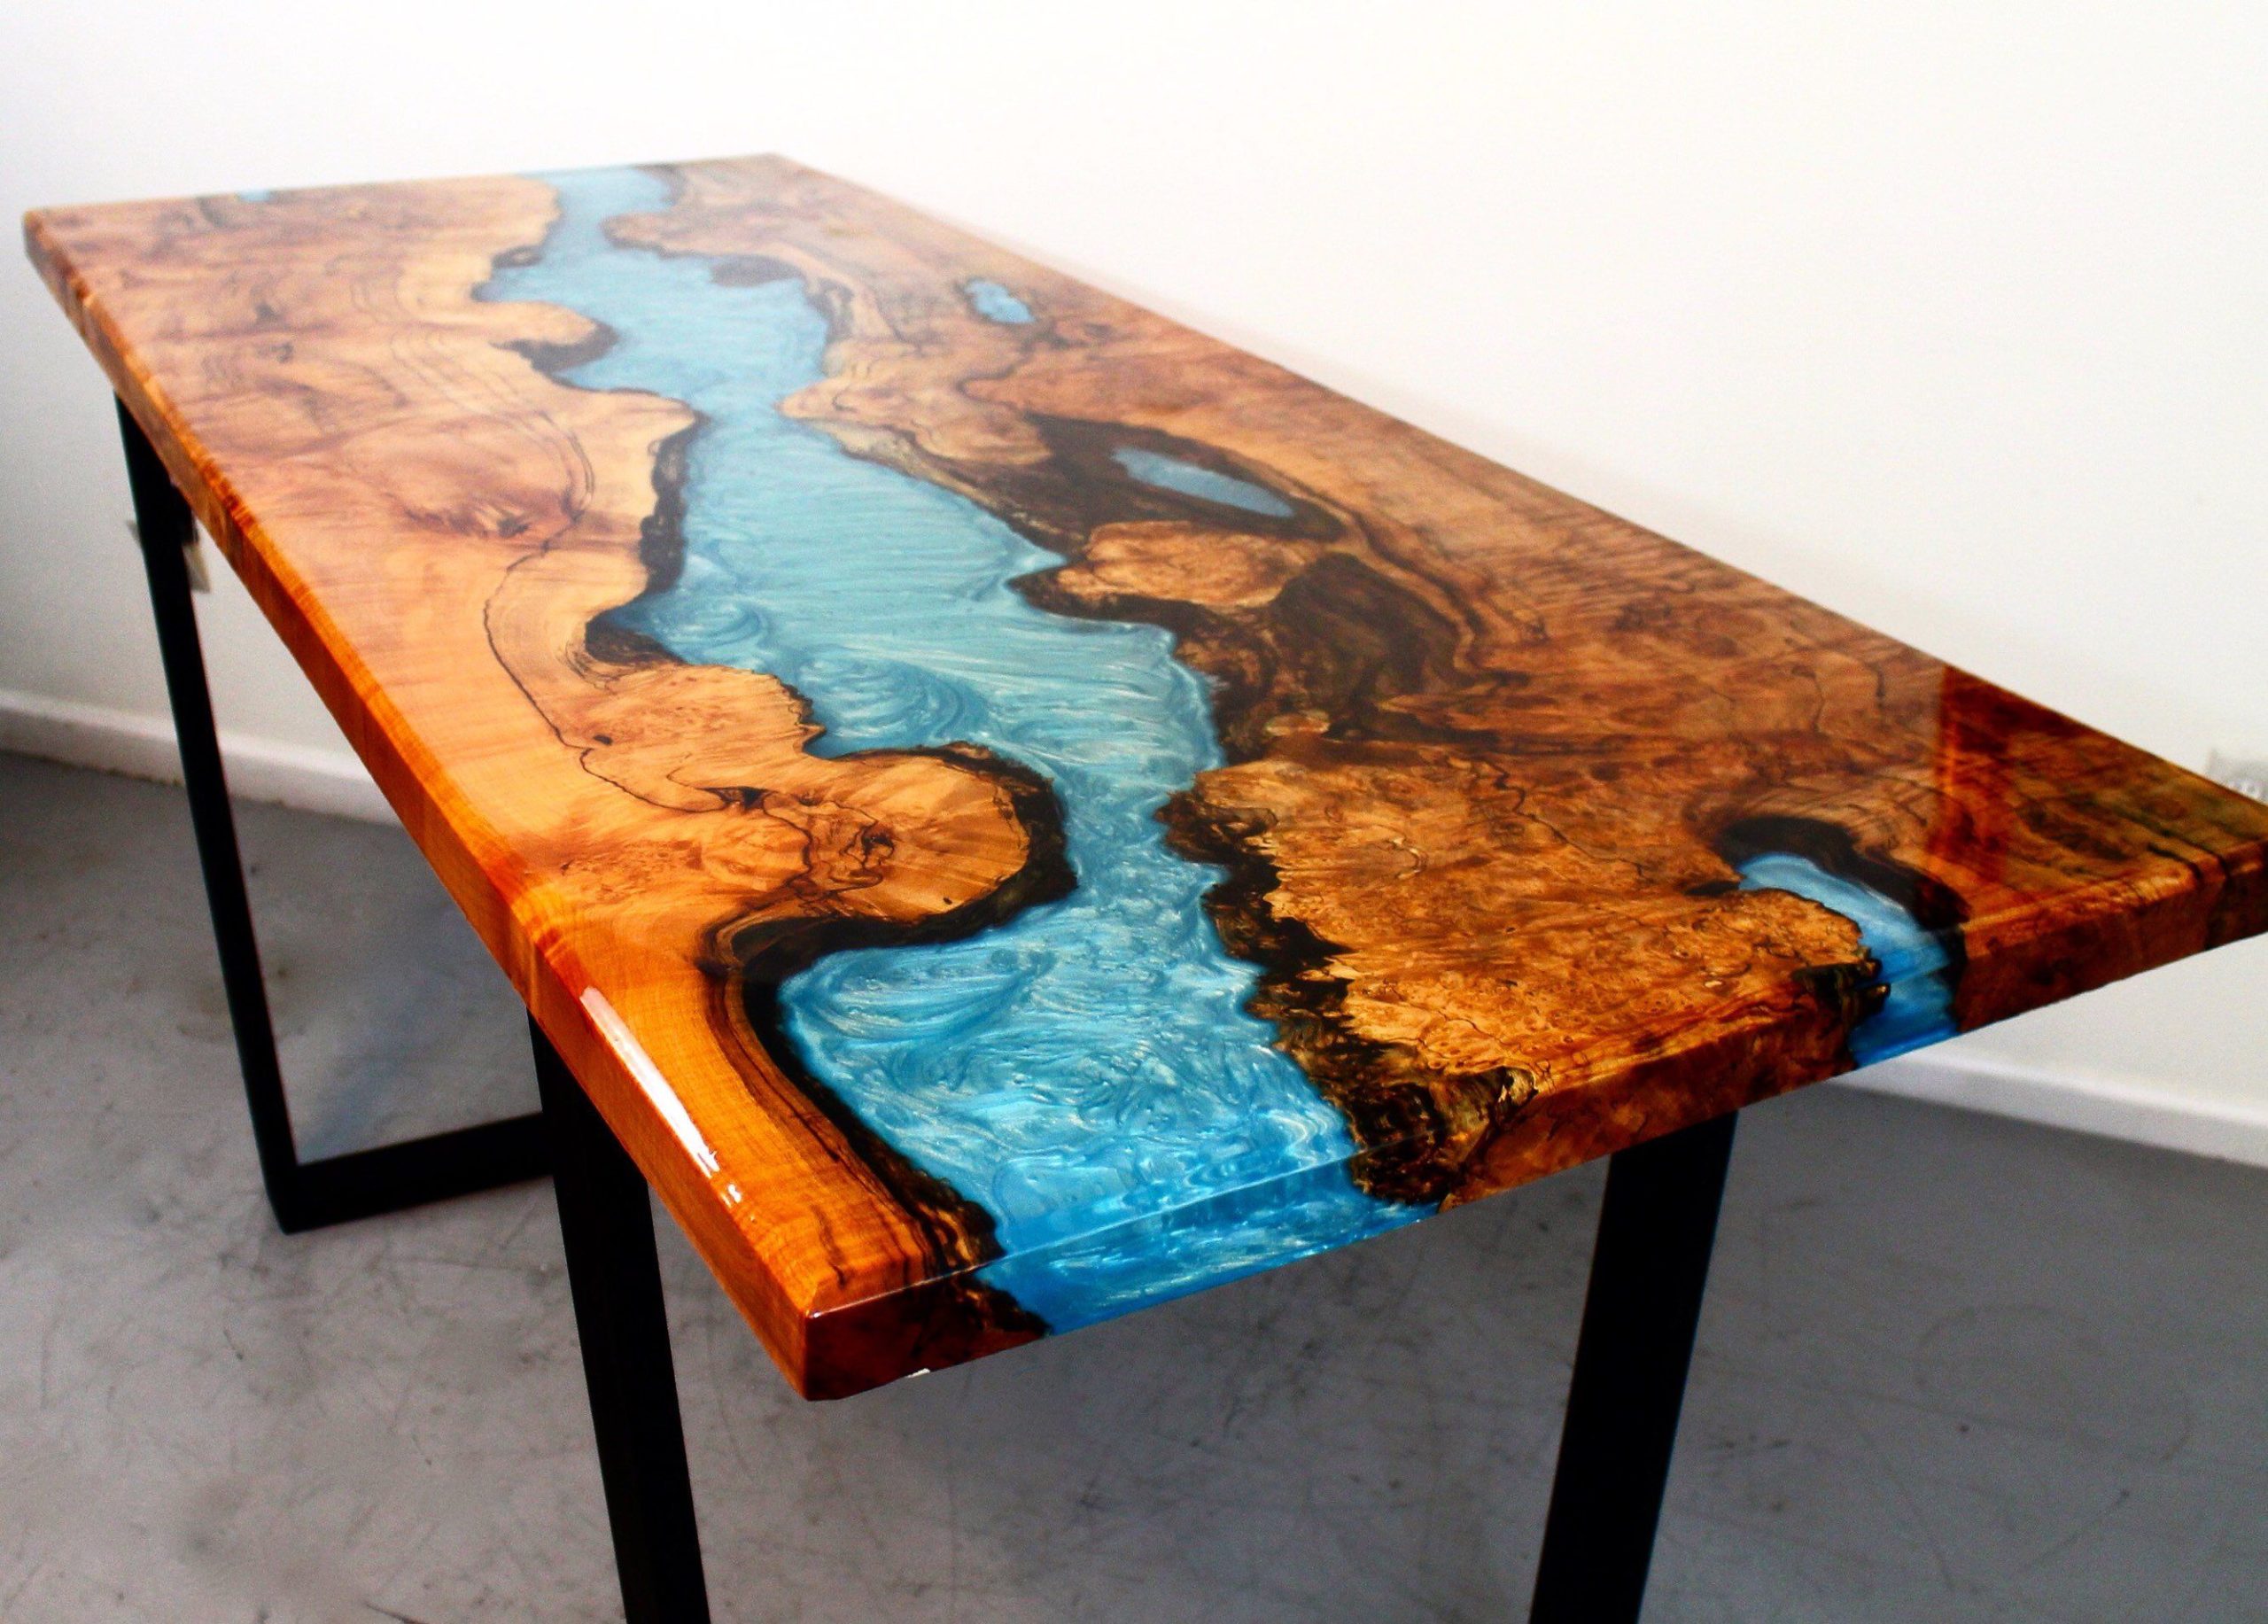 Final Project Report 2 Wood Resin Table Aesthetics Of Design